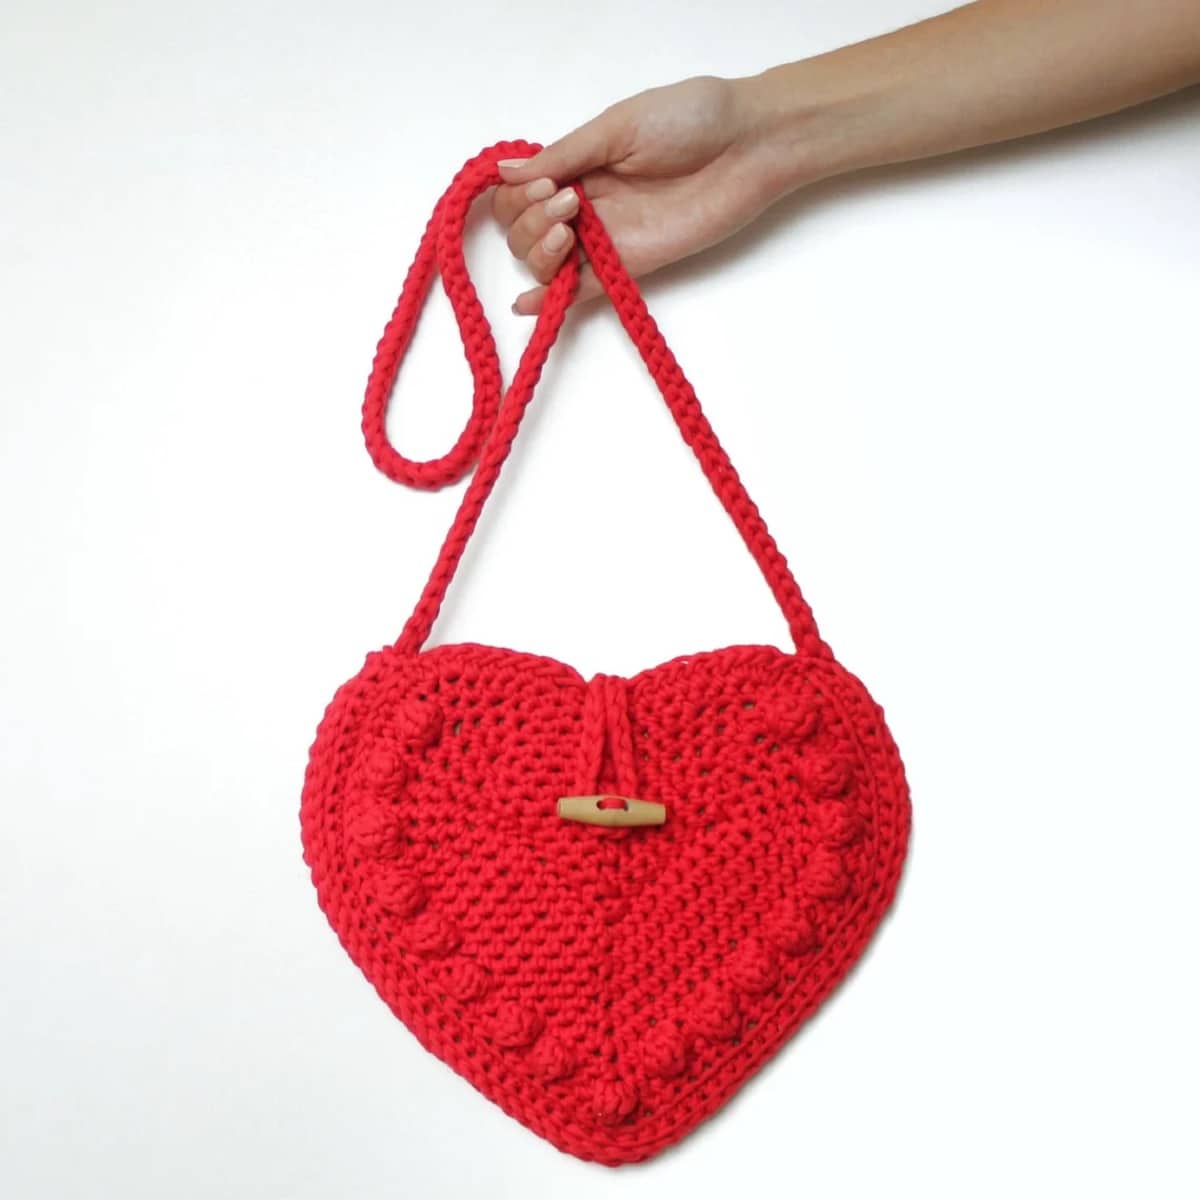 Red crochet heart shaped bag with bobbles stitched around the sides and a peg at the center to fasten dangled by its long strap by a hand.